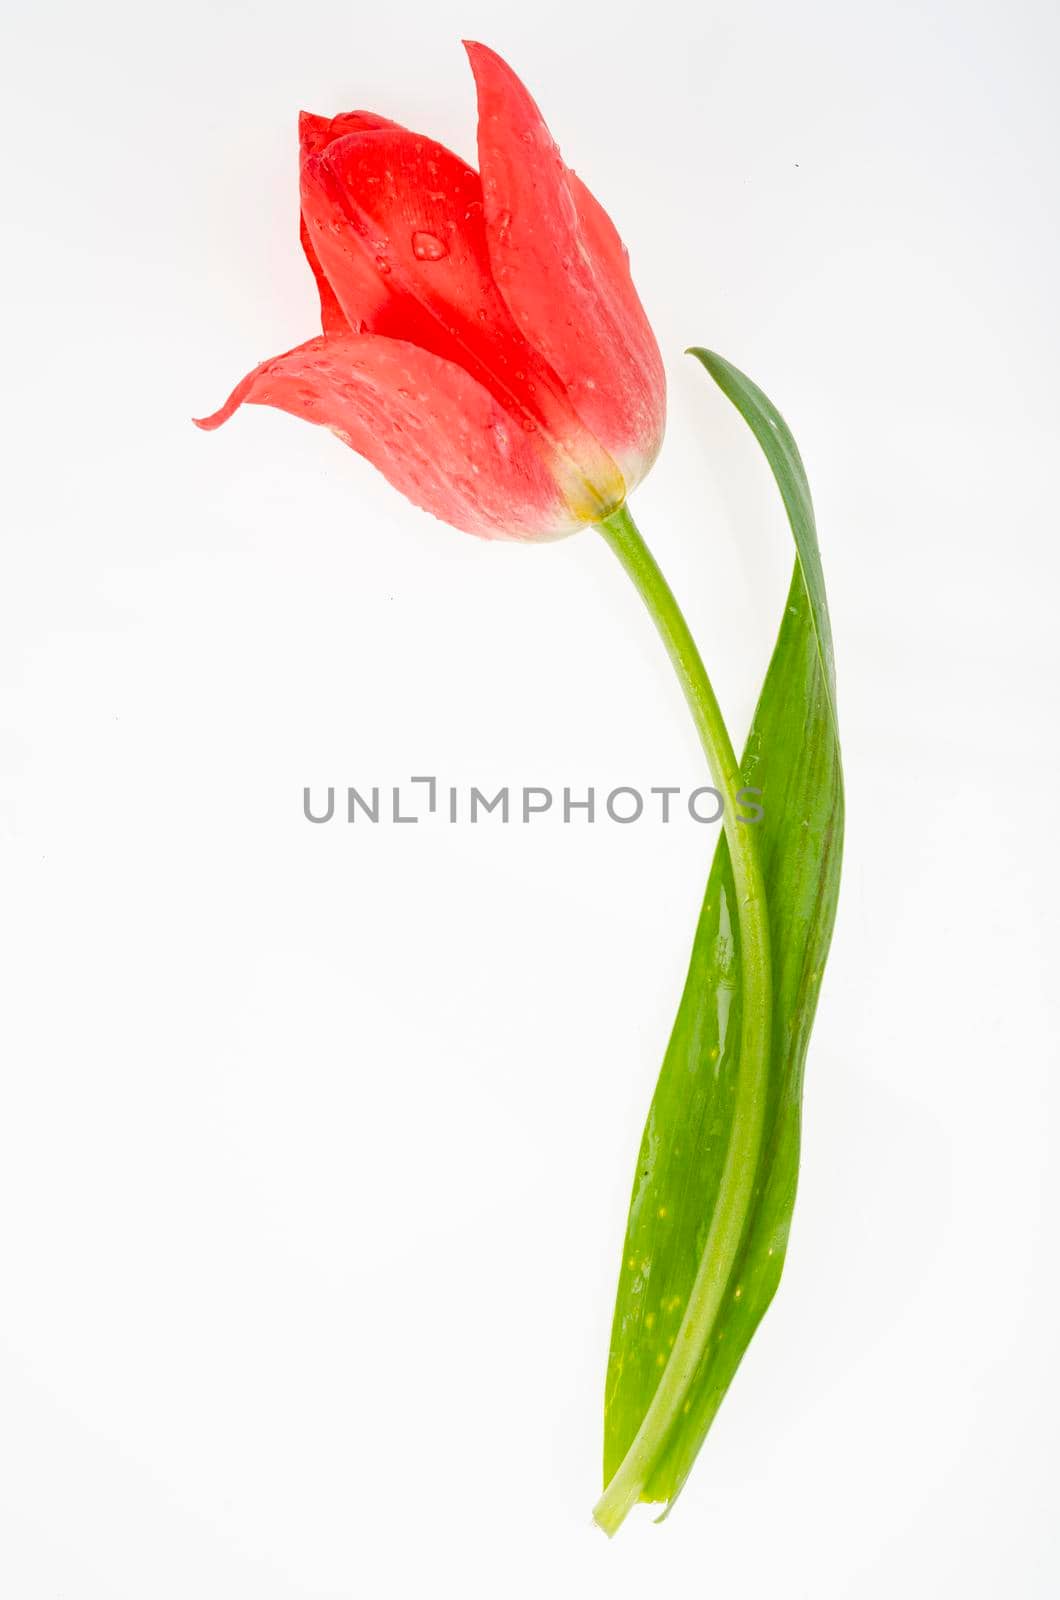 Single red and pink fresh tulip isolated on white background. Studio Photo.